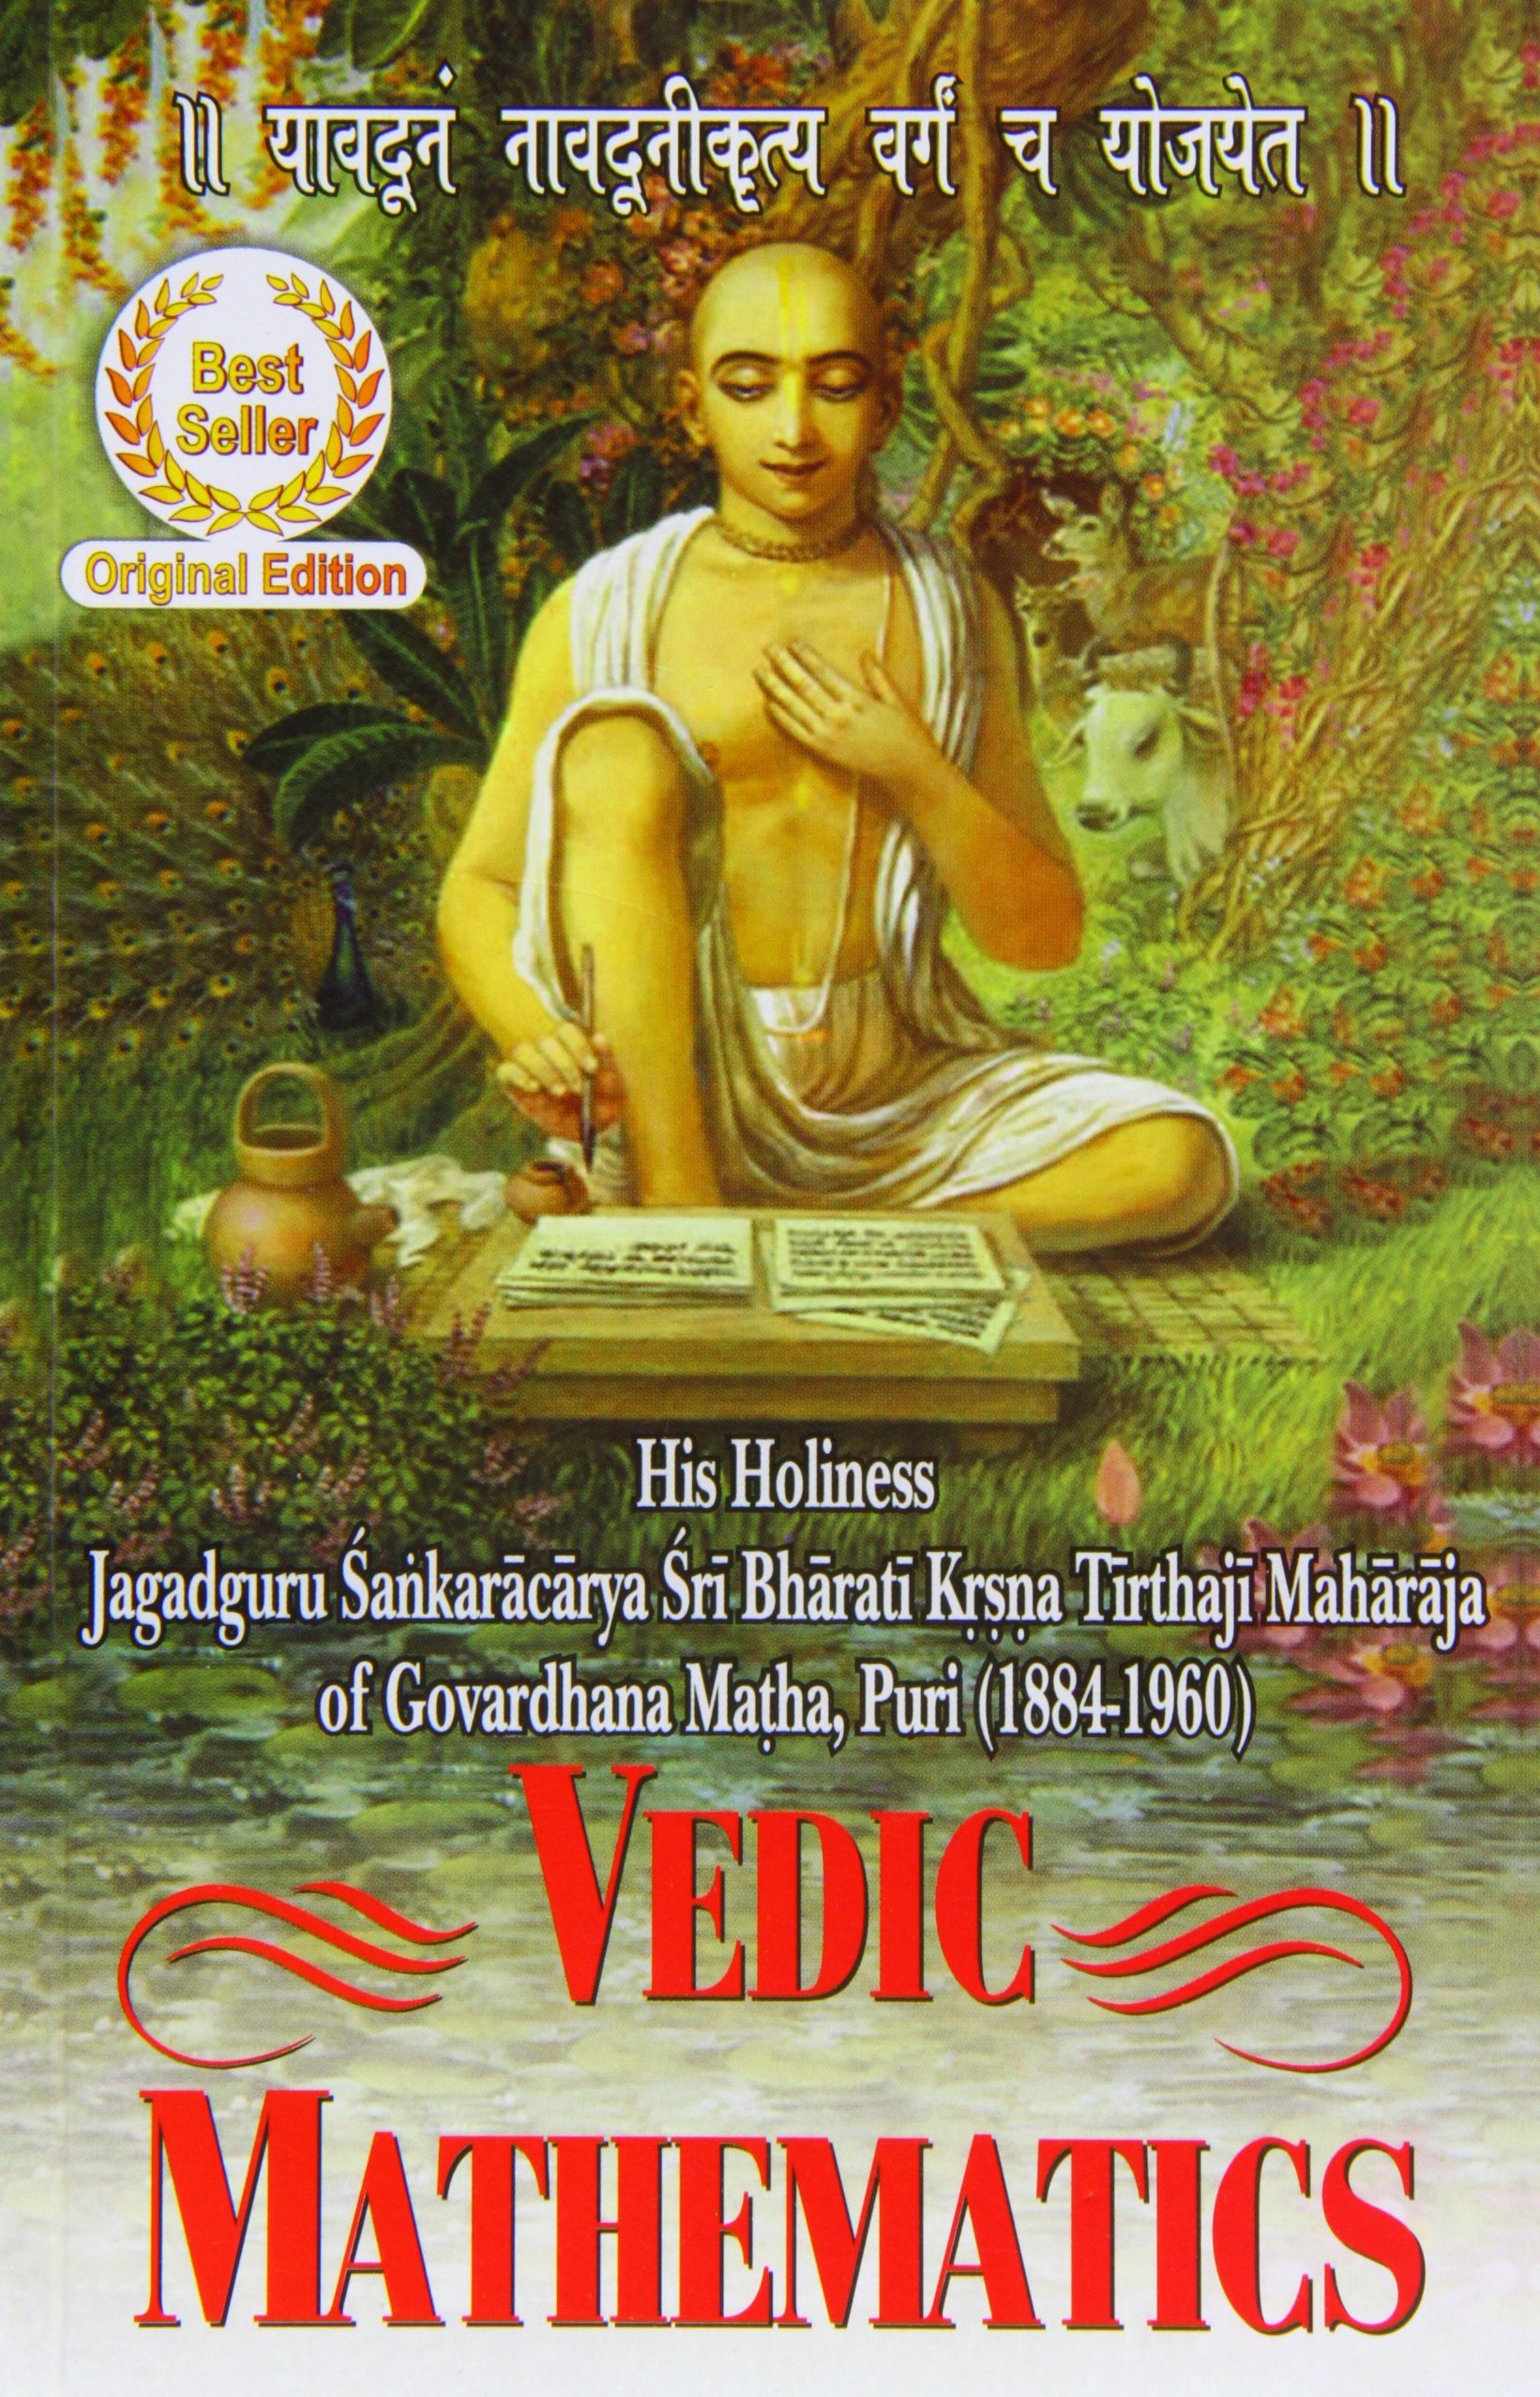 vedic maths research papers